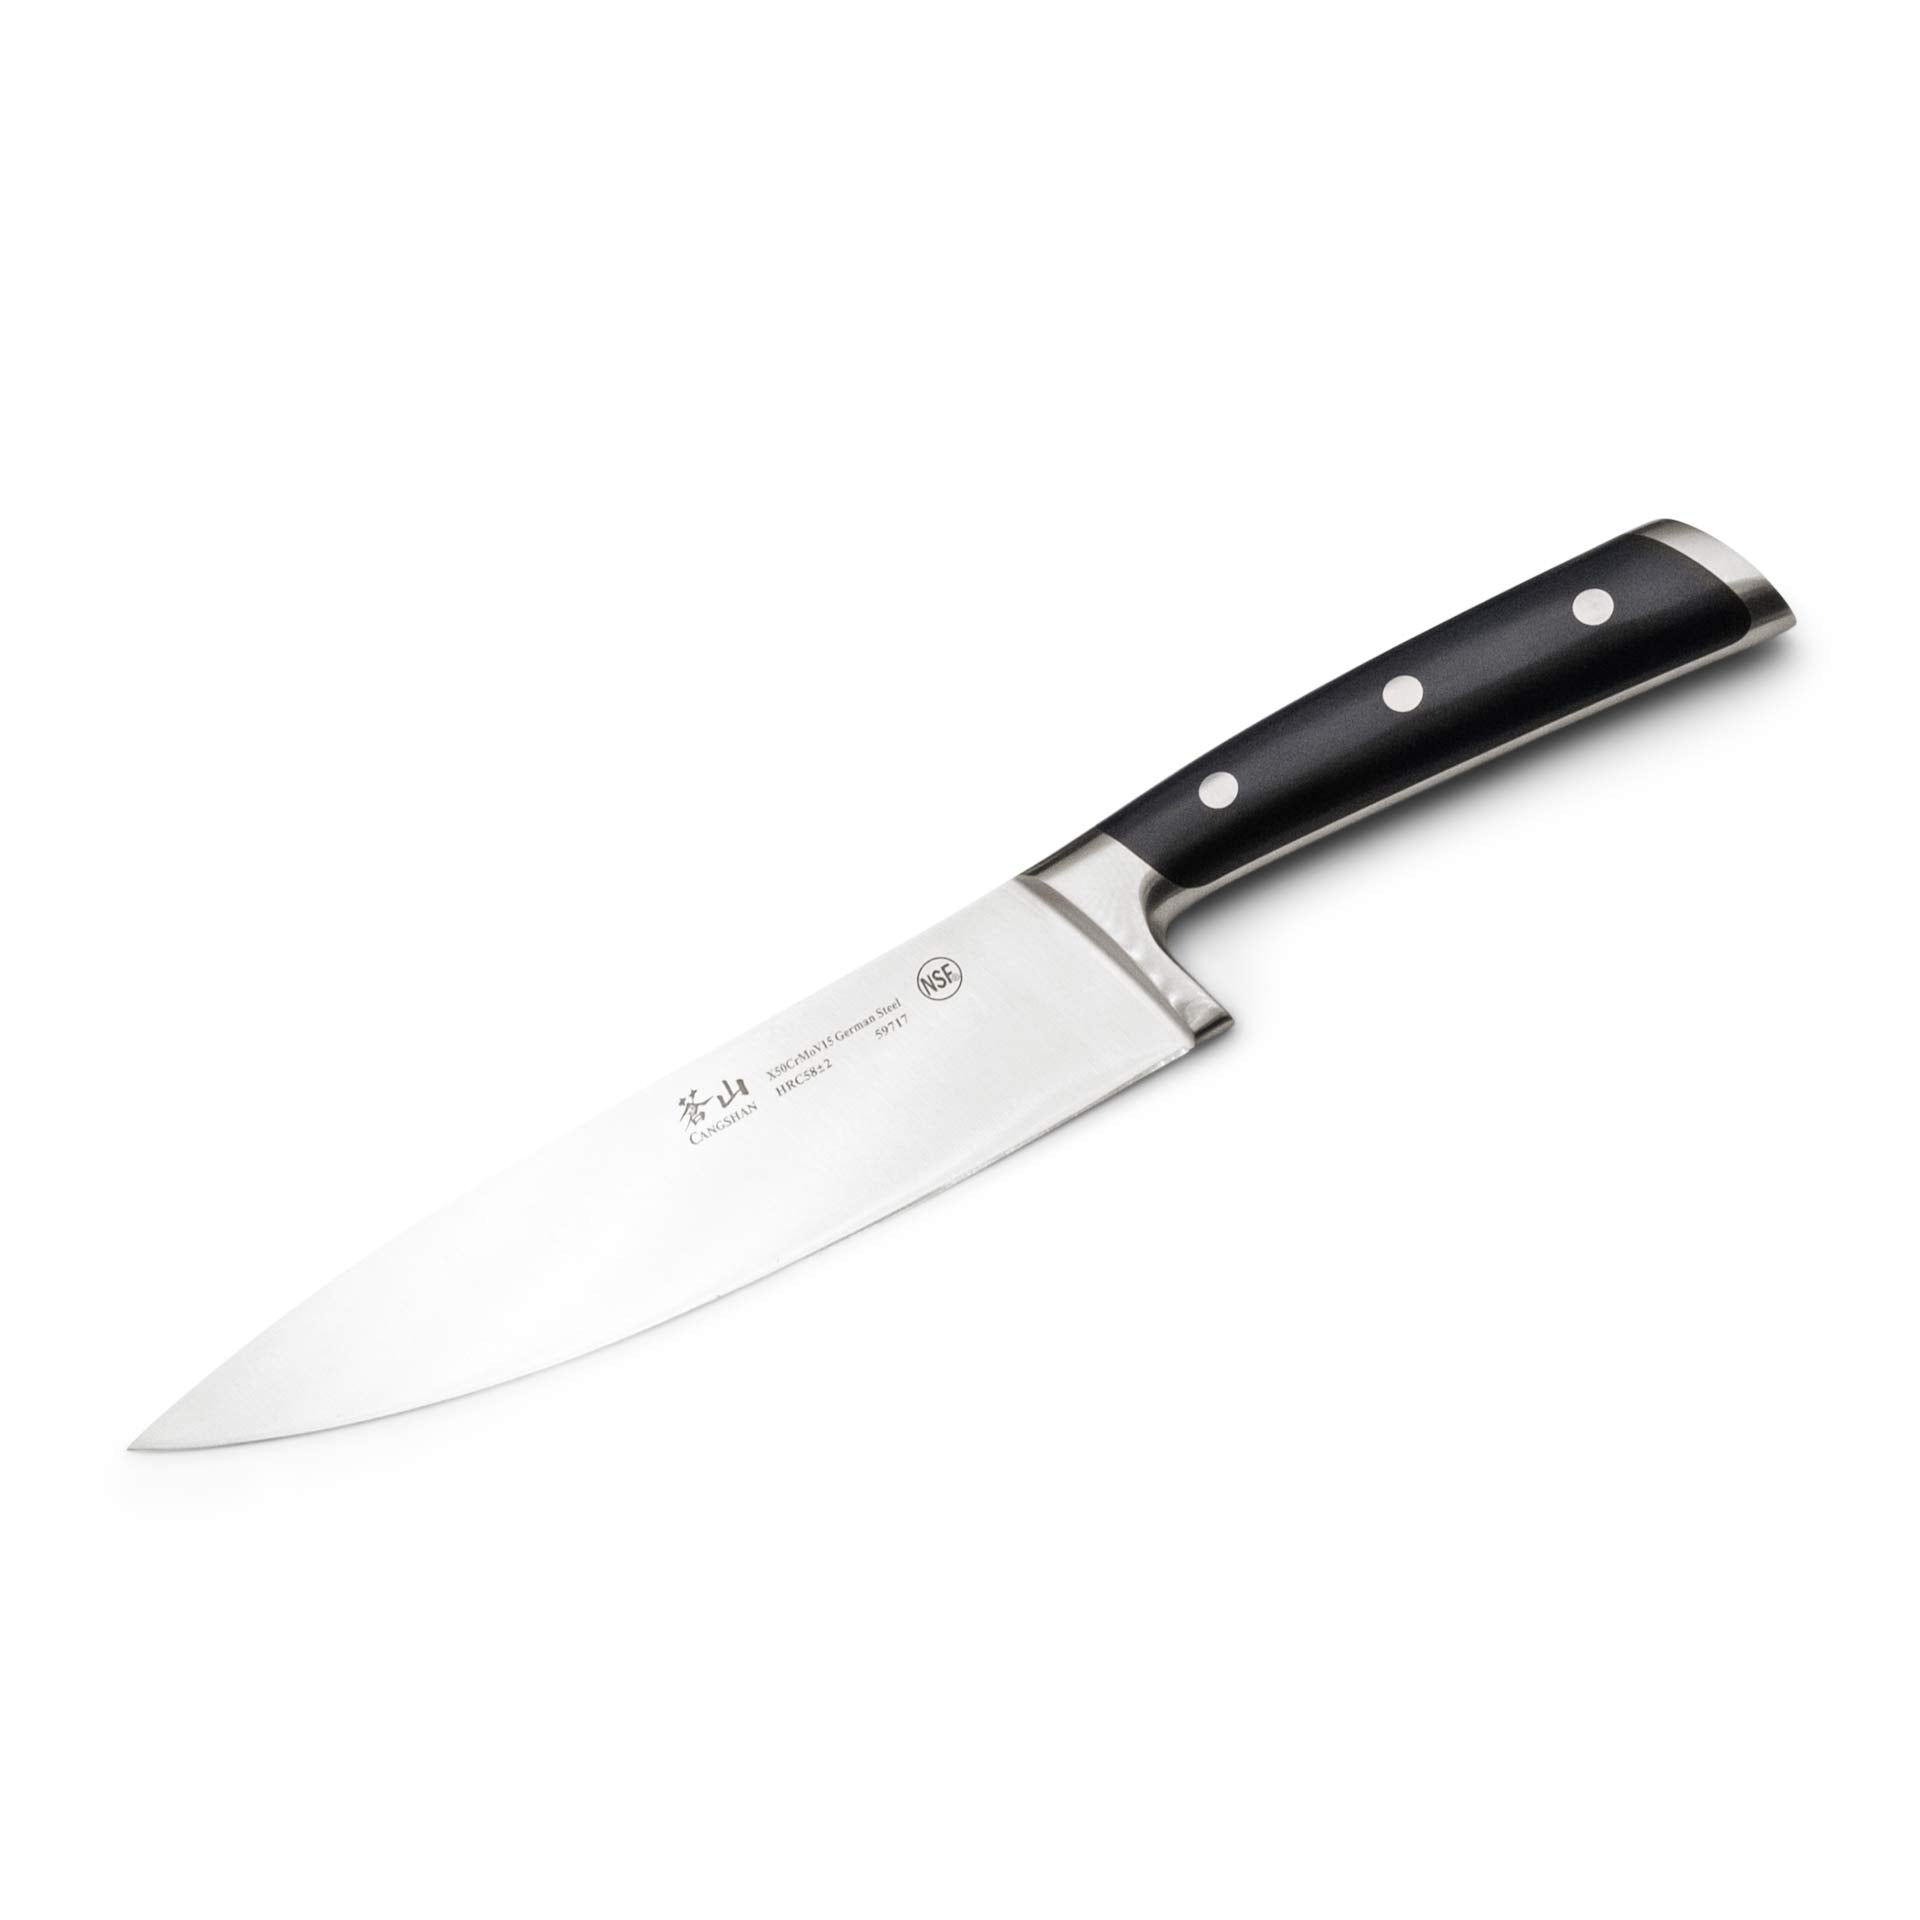 Cangshan 8 V2 Series German Steel Forged Chef's Knife